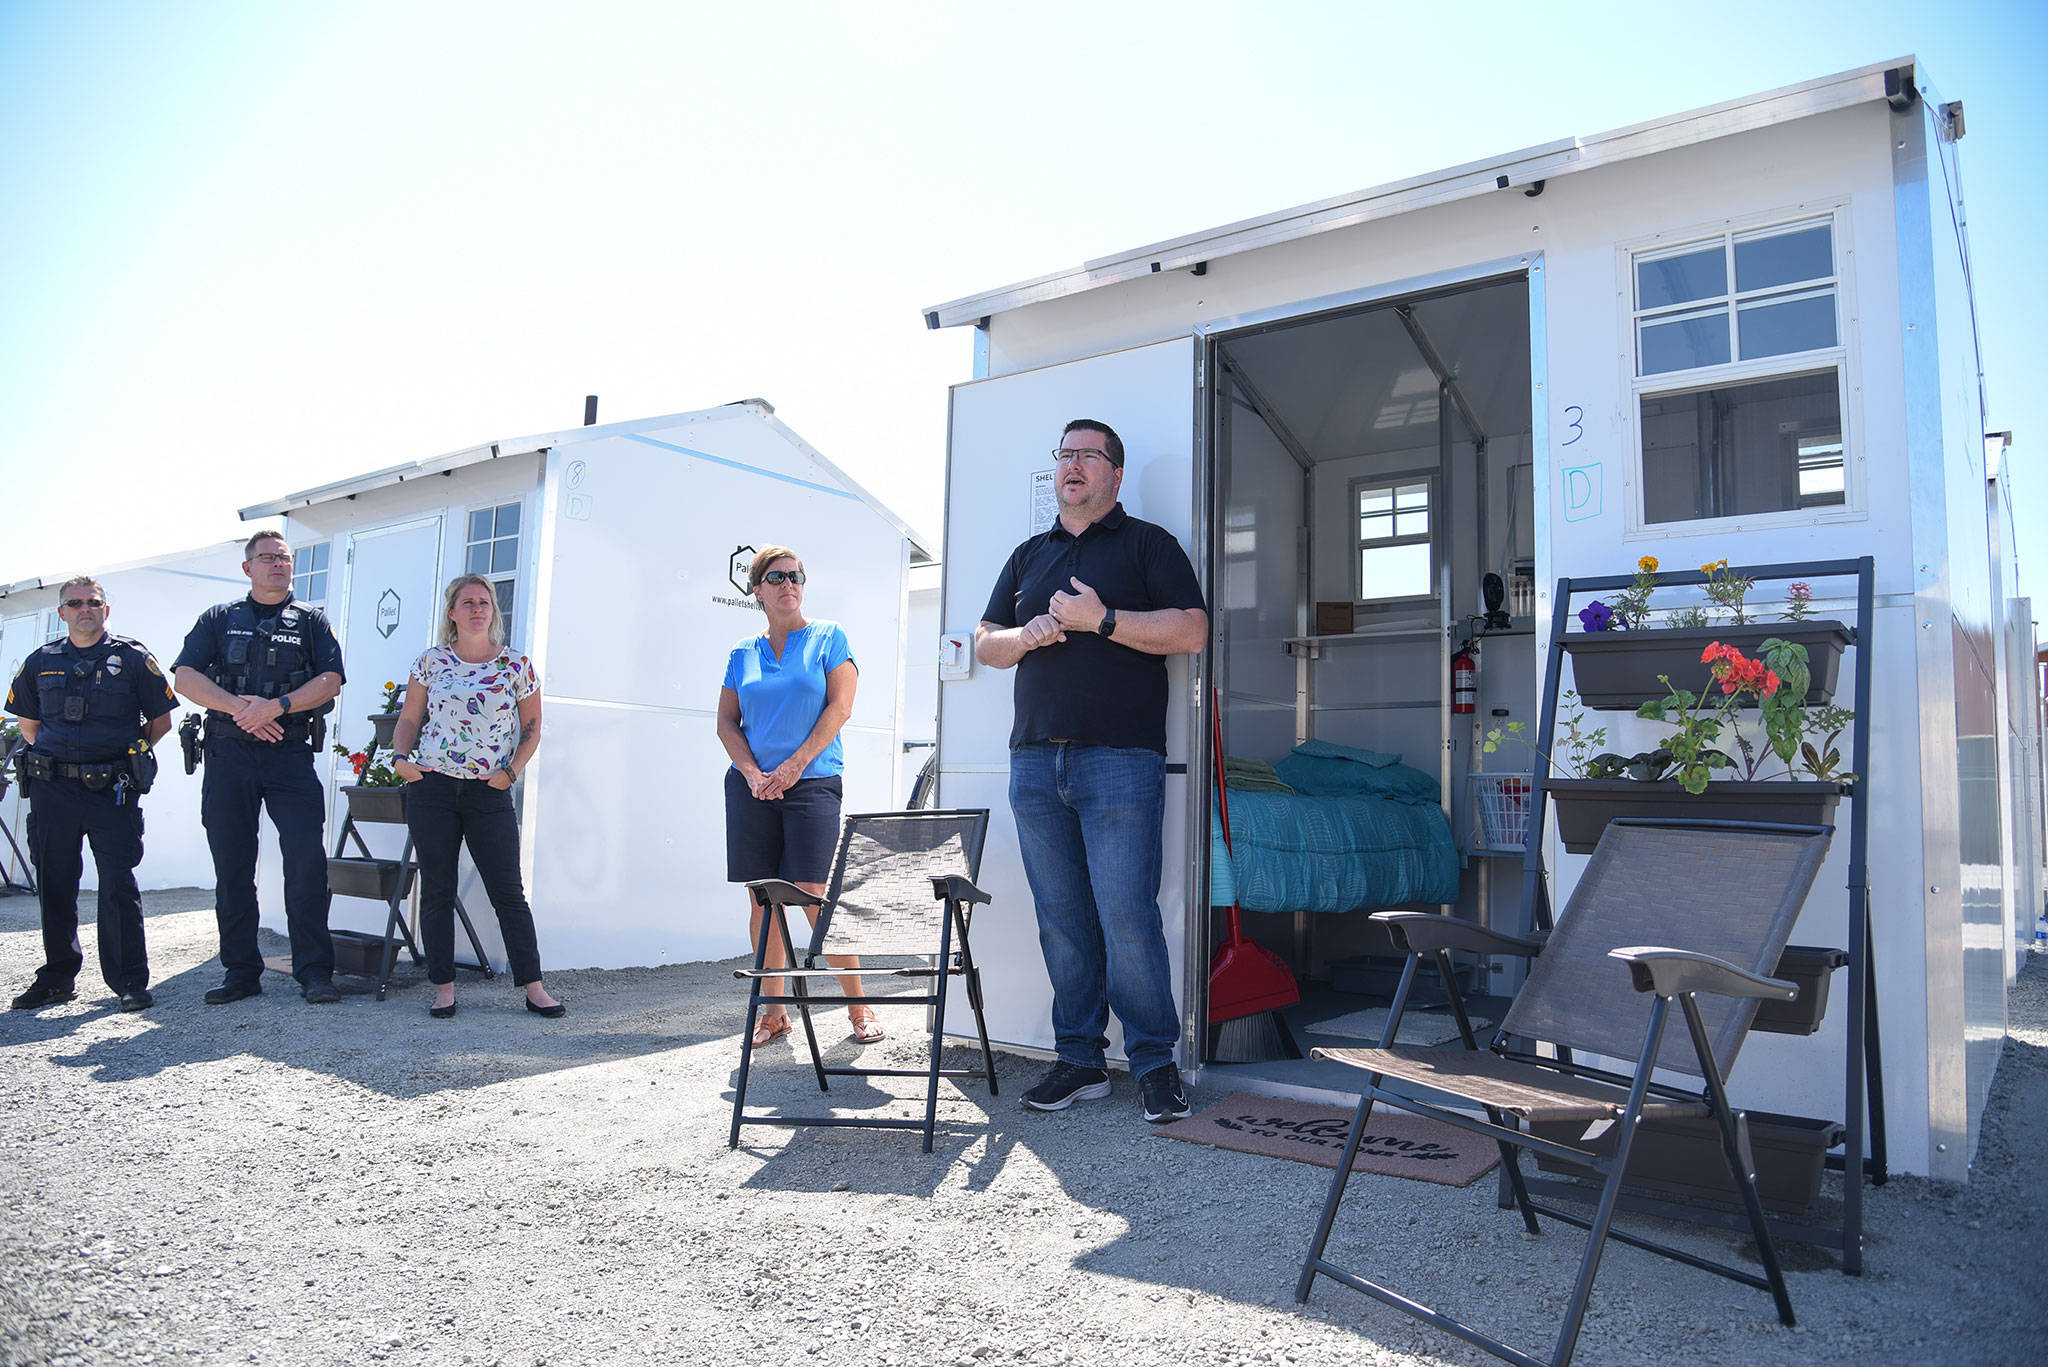 Patrick Diller, head of community partnerships for Pallet, discusses the Pallet Shelter Pilot Project on Tuesday in Everett. (Katie Hayes / The Herald)